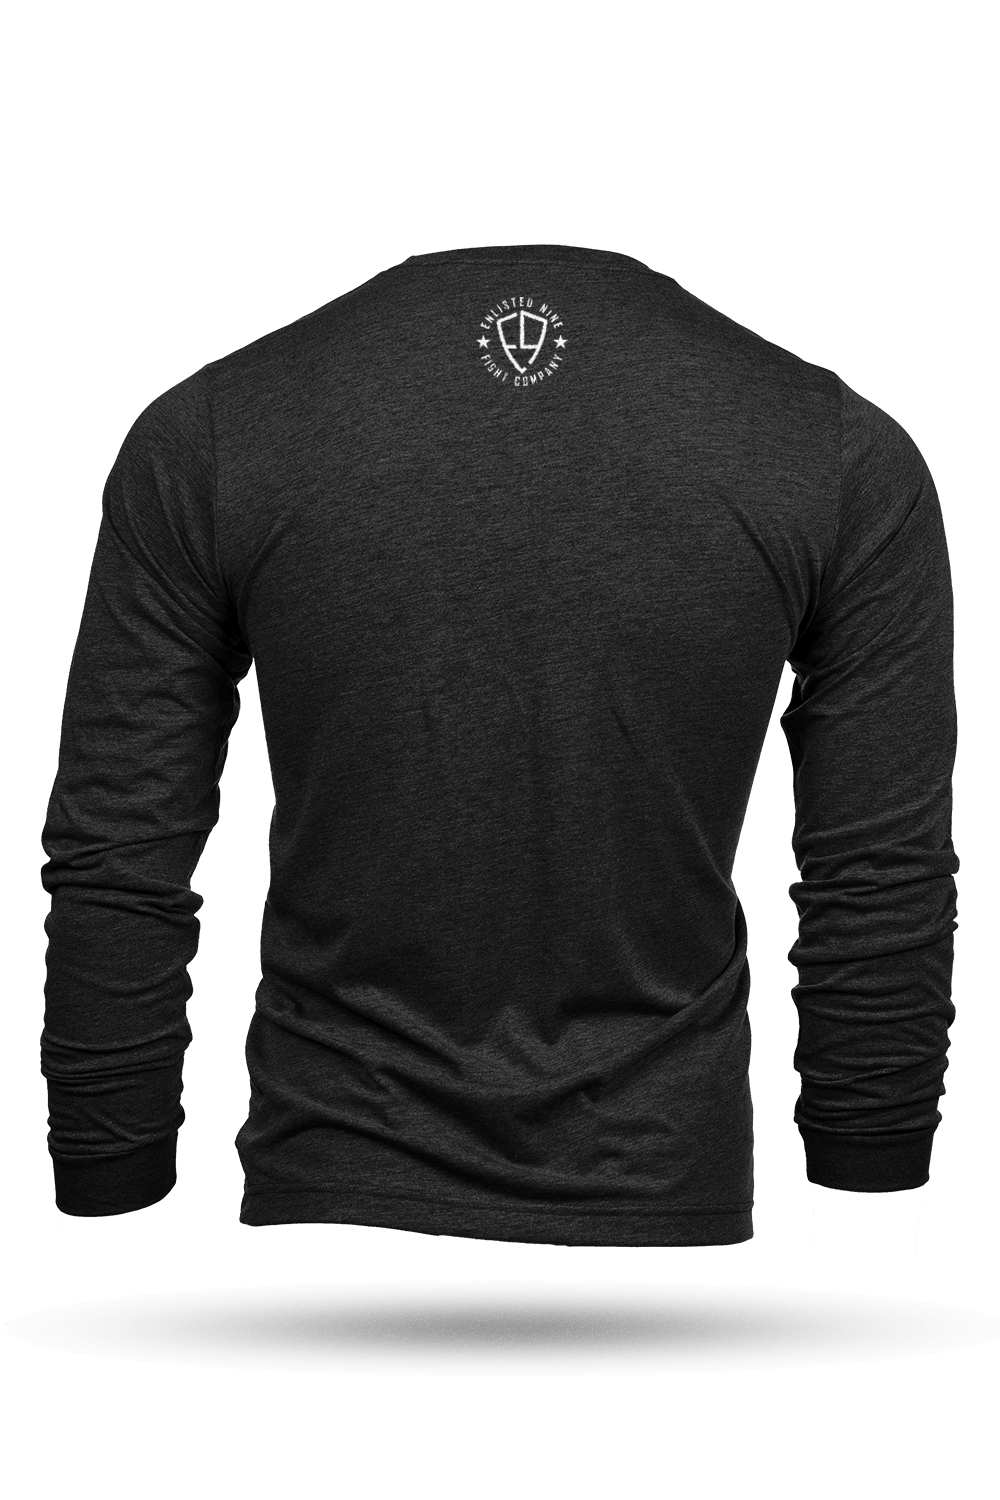 Enlisted 9 - Men's Long Sleeve - Texas Come and Take It